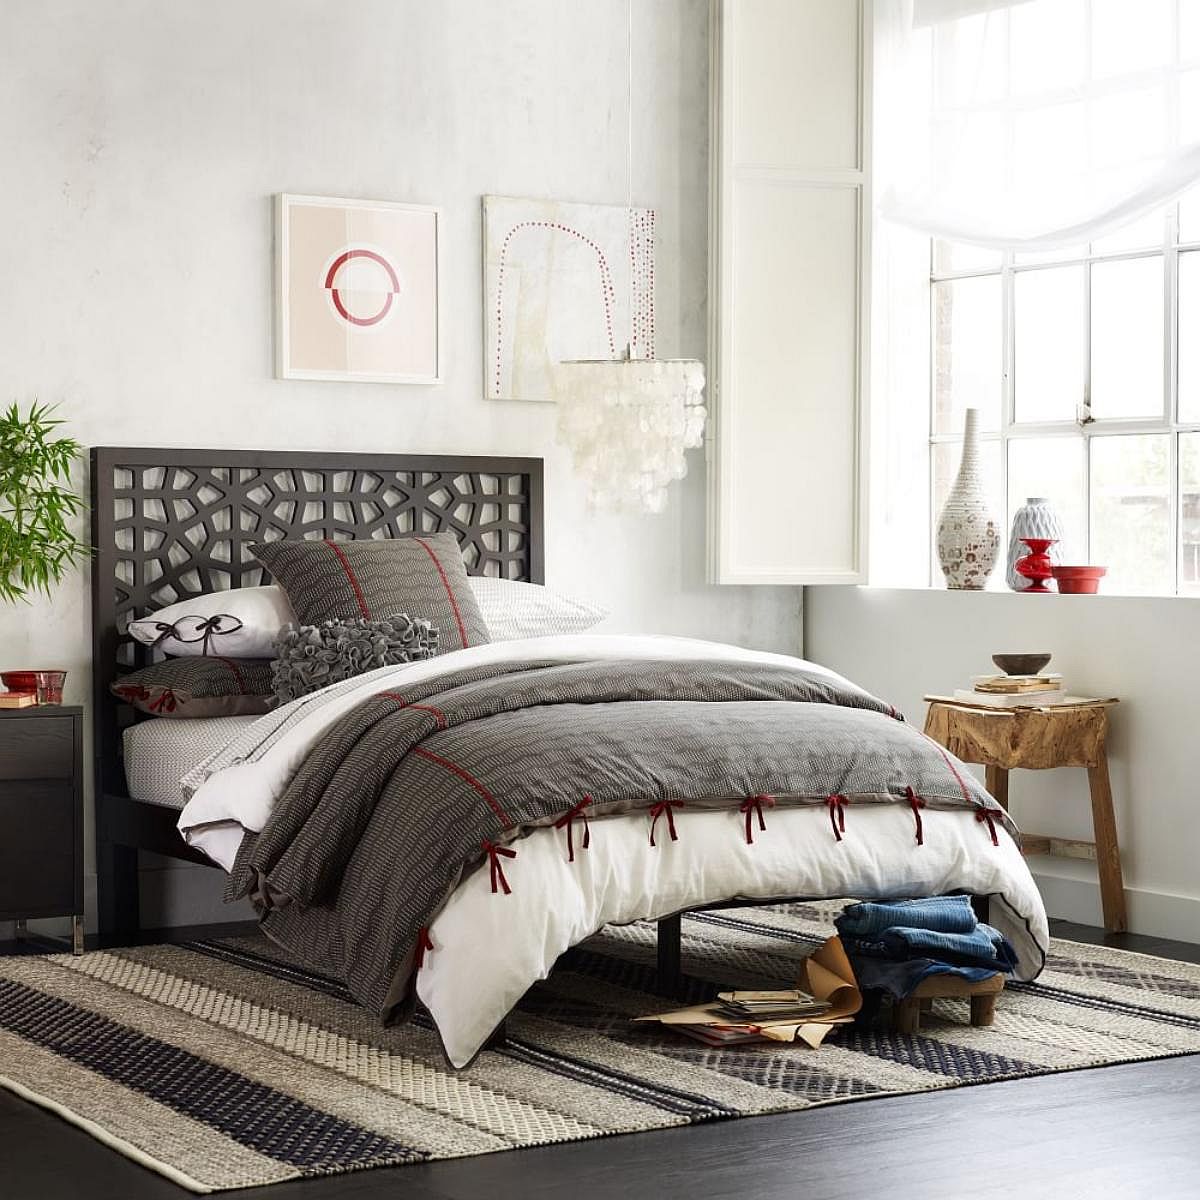 Morocco-inspired headboard deisgn adds to the style of contemporary bedroom - West Elm